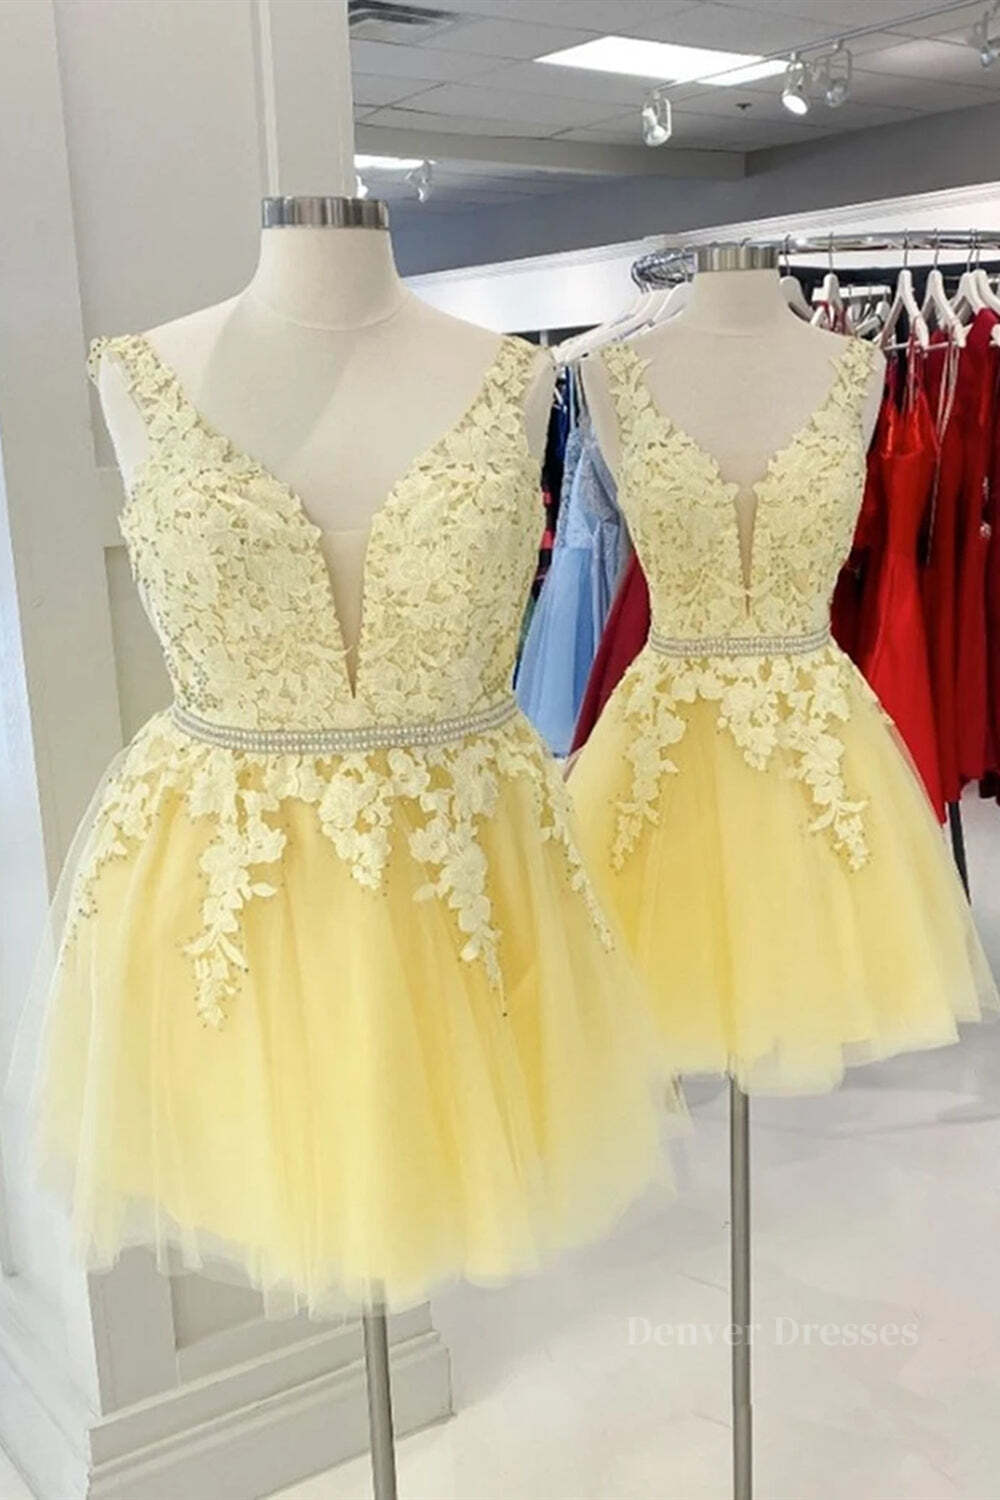 Homecoming Dresses Freshman, Cute V Neck Yellow Lace Short Prom Dress with Belt, Yellow Lace Homecoming Dress, Short Yellow Formal Evening Dress